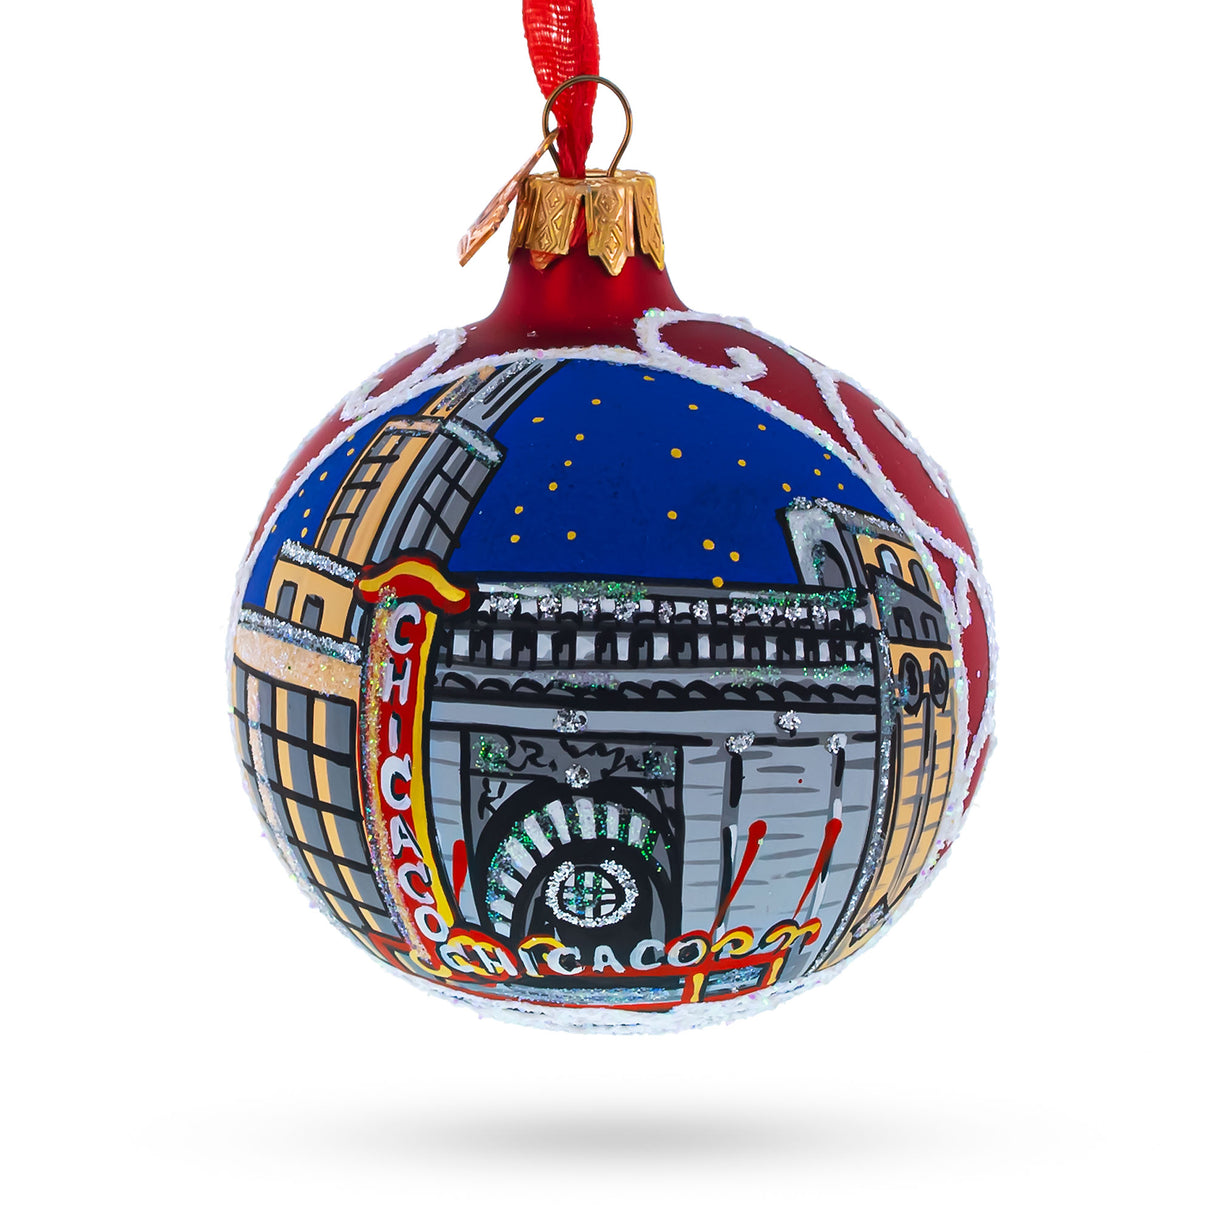 Iconic Chicago Theater - Artisan Blown Glass Ball Christmas Ornament 3.25 Inches in Red color, Round shape